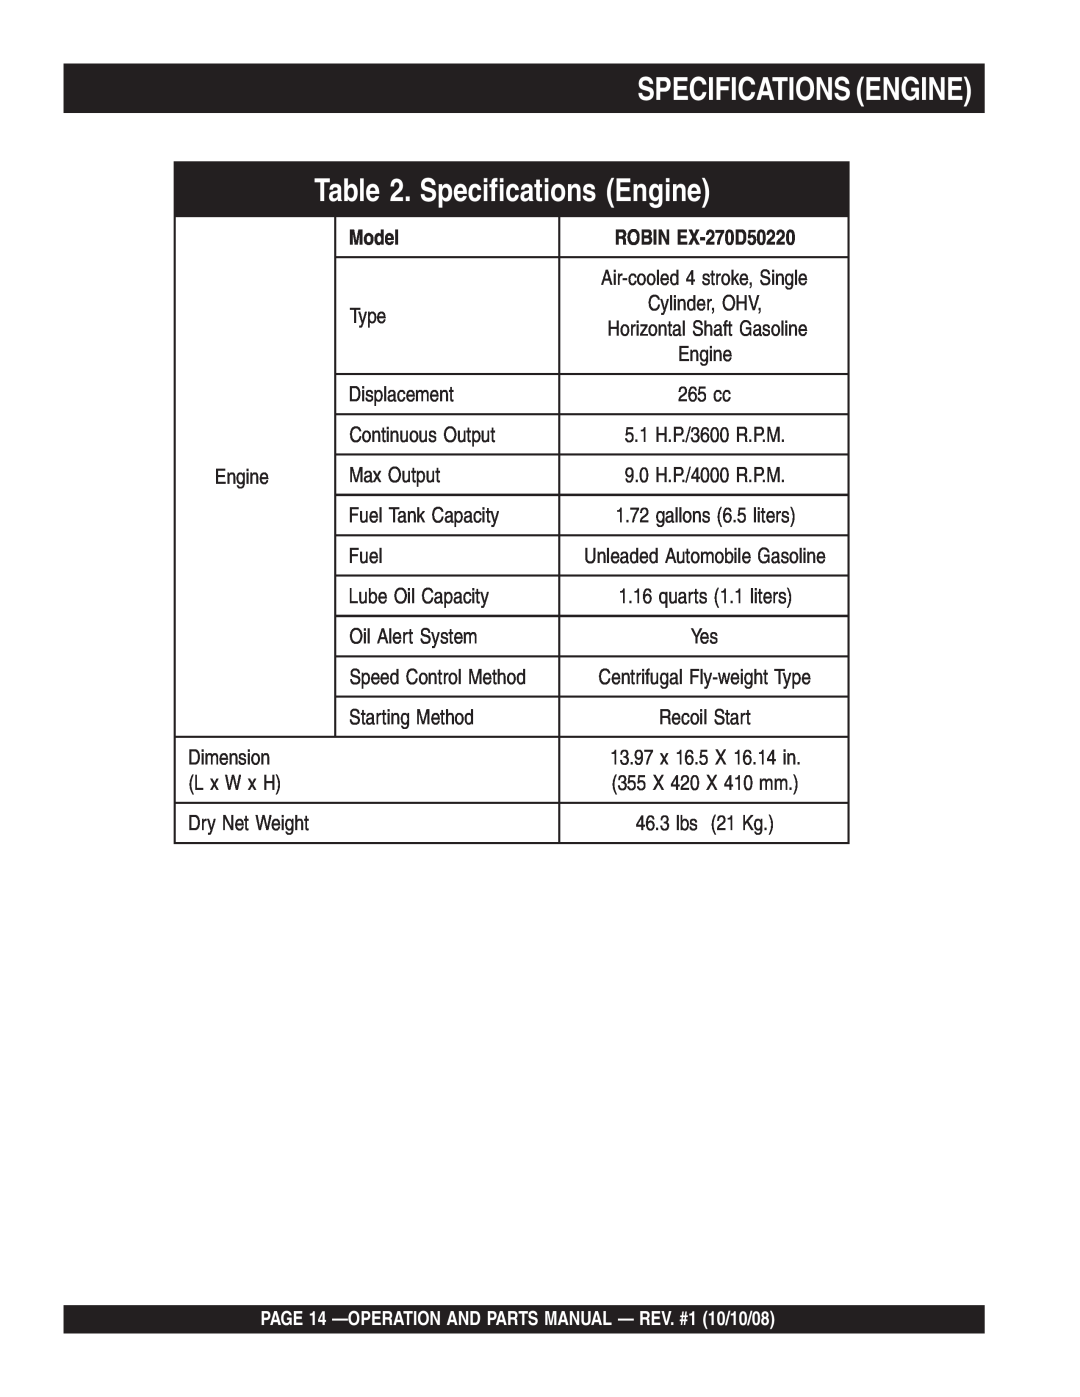 Multiquip QP4TE Specifications Engine, ROBIN EX-270D50220, Model, PAGE 14 -OPERATION AND PARTS MANUAL - REV. #1 10/10/08 